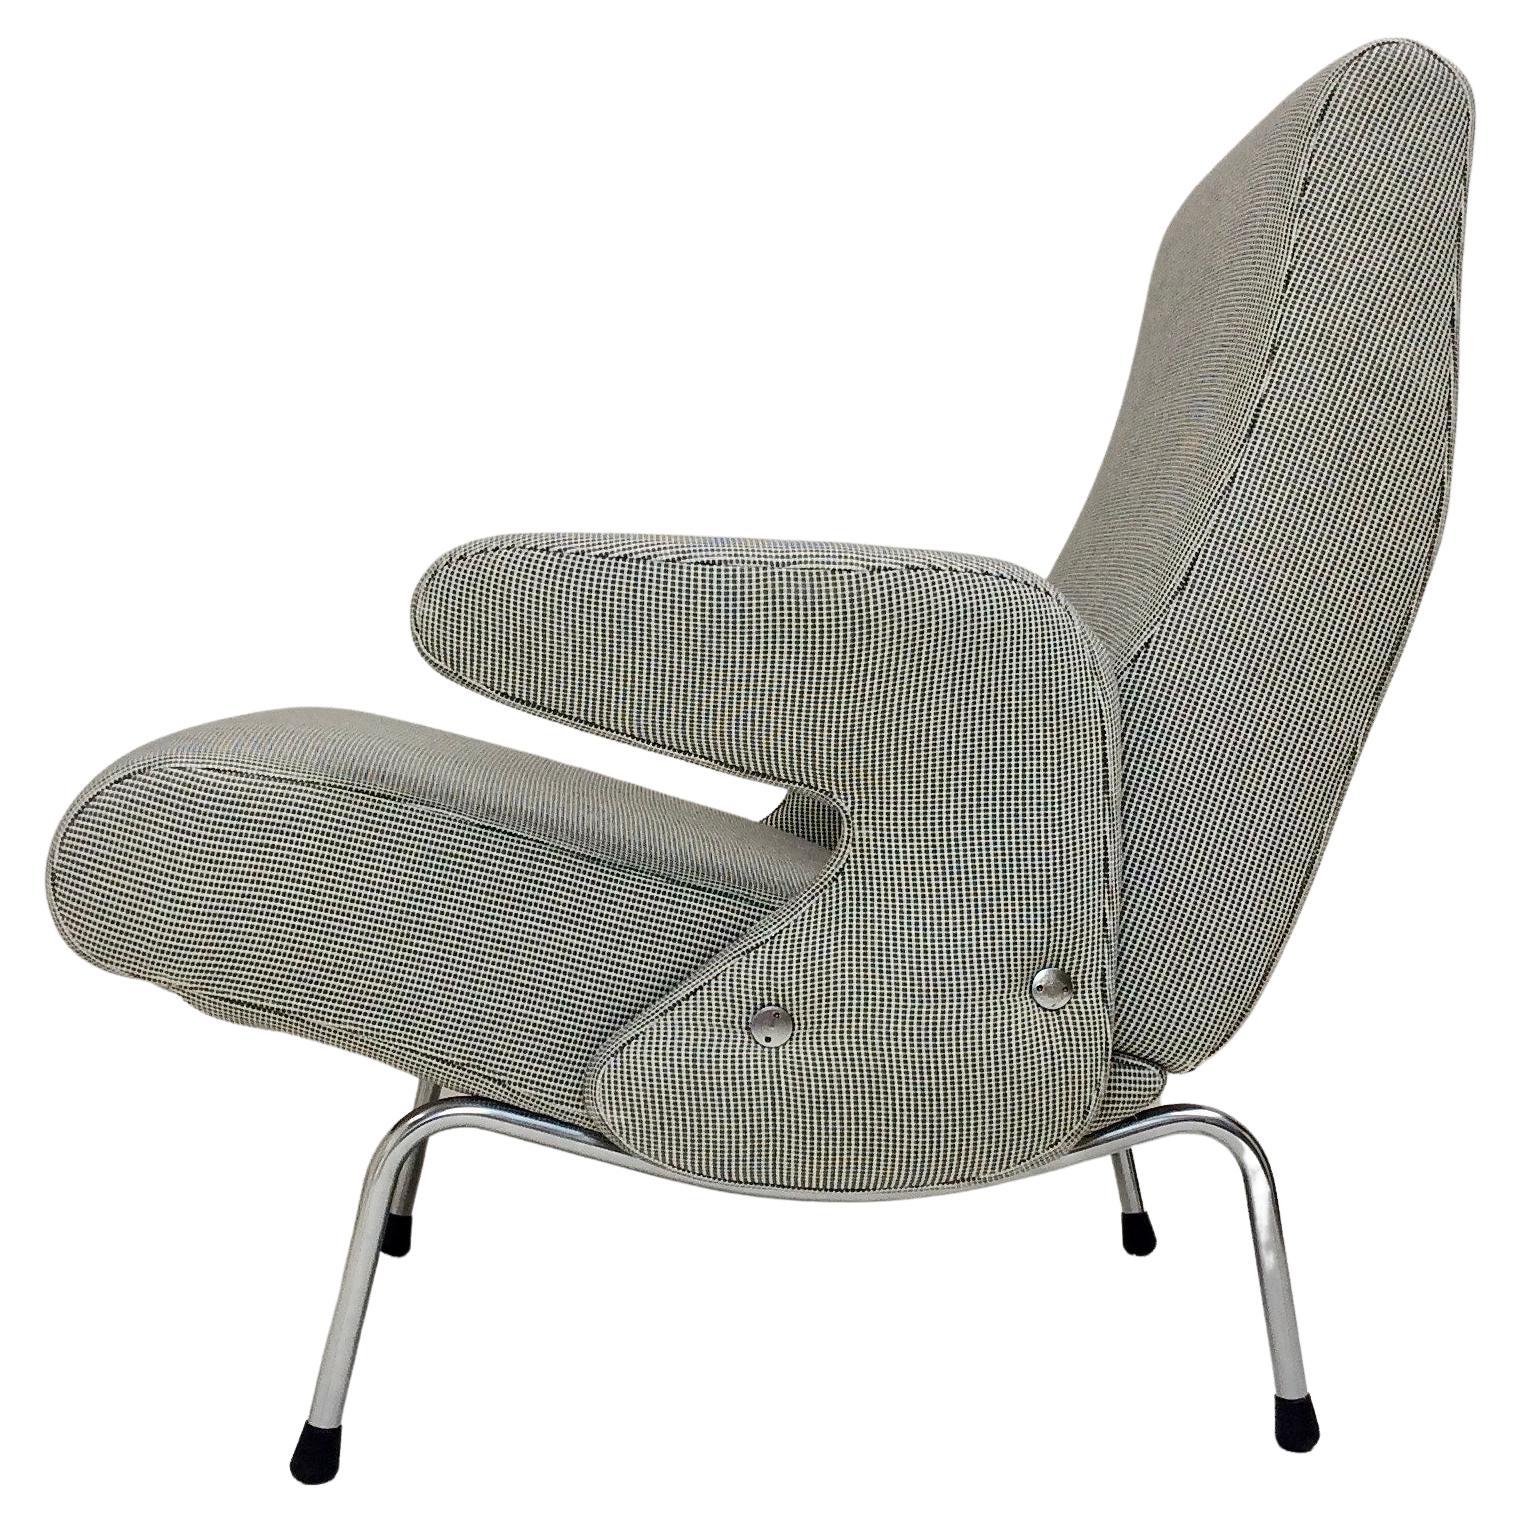 Nice Delfino armchair by Erberto Carboni for Arflex, circa 1954, Italy.
New upholstery, chromed steel feet, rubbers.
Dimensions: 82 cm H, 85 cm D, 71 cm W, seat height: 41 cm.
All purchases are covered by our Buyer Protection Guarantee.
This item